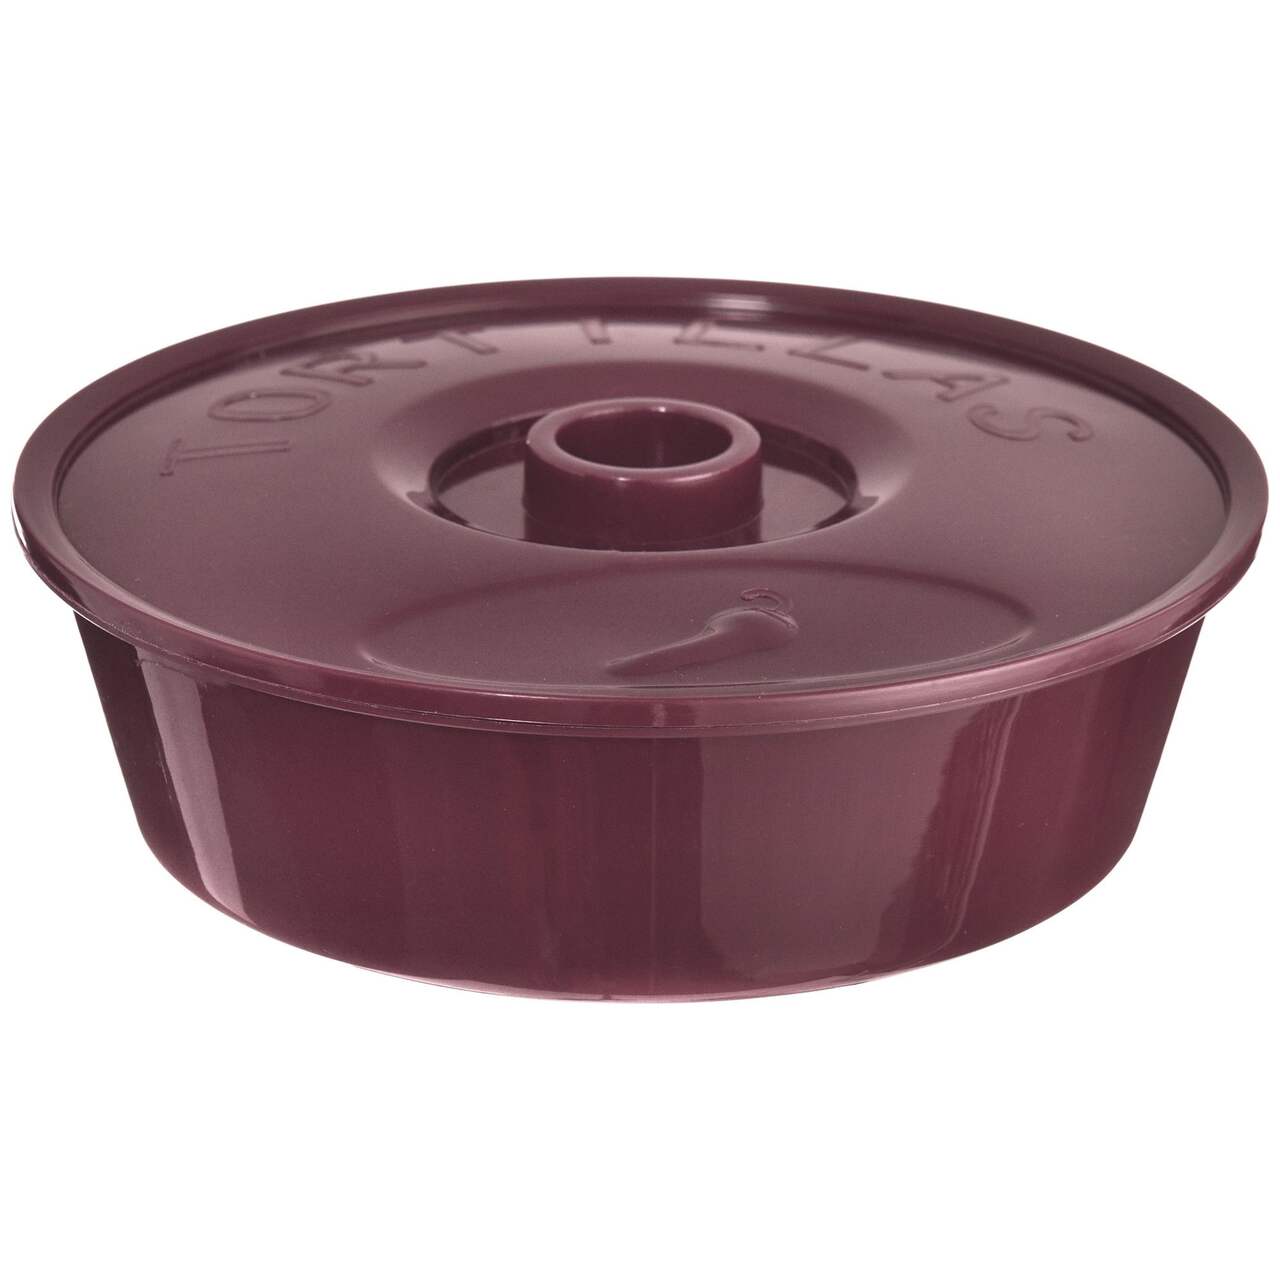 https://media-www.canadiantire.ca/product/seasonal-gardening/party-city-everyday/pc-year-round-themed-supplies-decor/8535923/plastic-tortilla-warmer-41c2d8b8-fa2f-45fd-9d51-bf33489381ce-jpgrendition.jpg?imdensity=1&imwidth=640&impolicy=mZoom